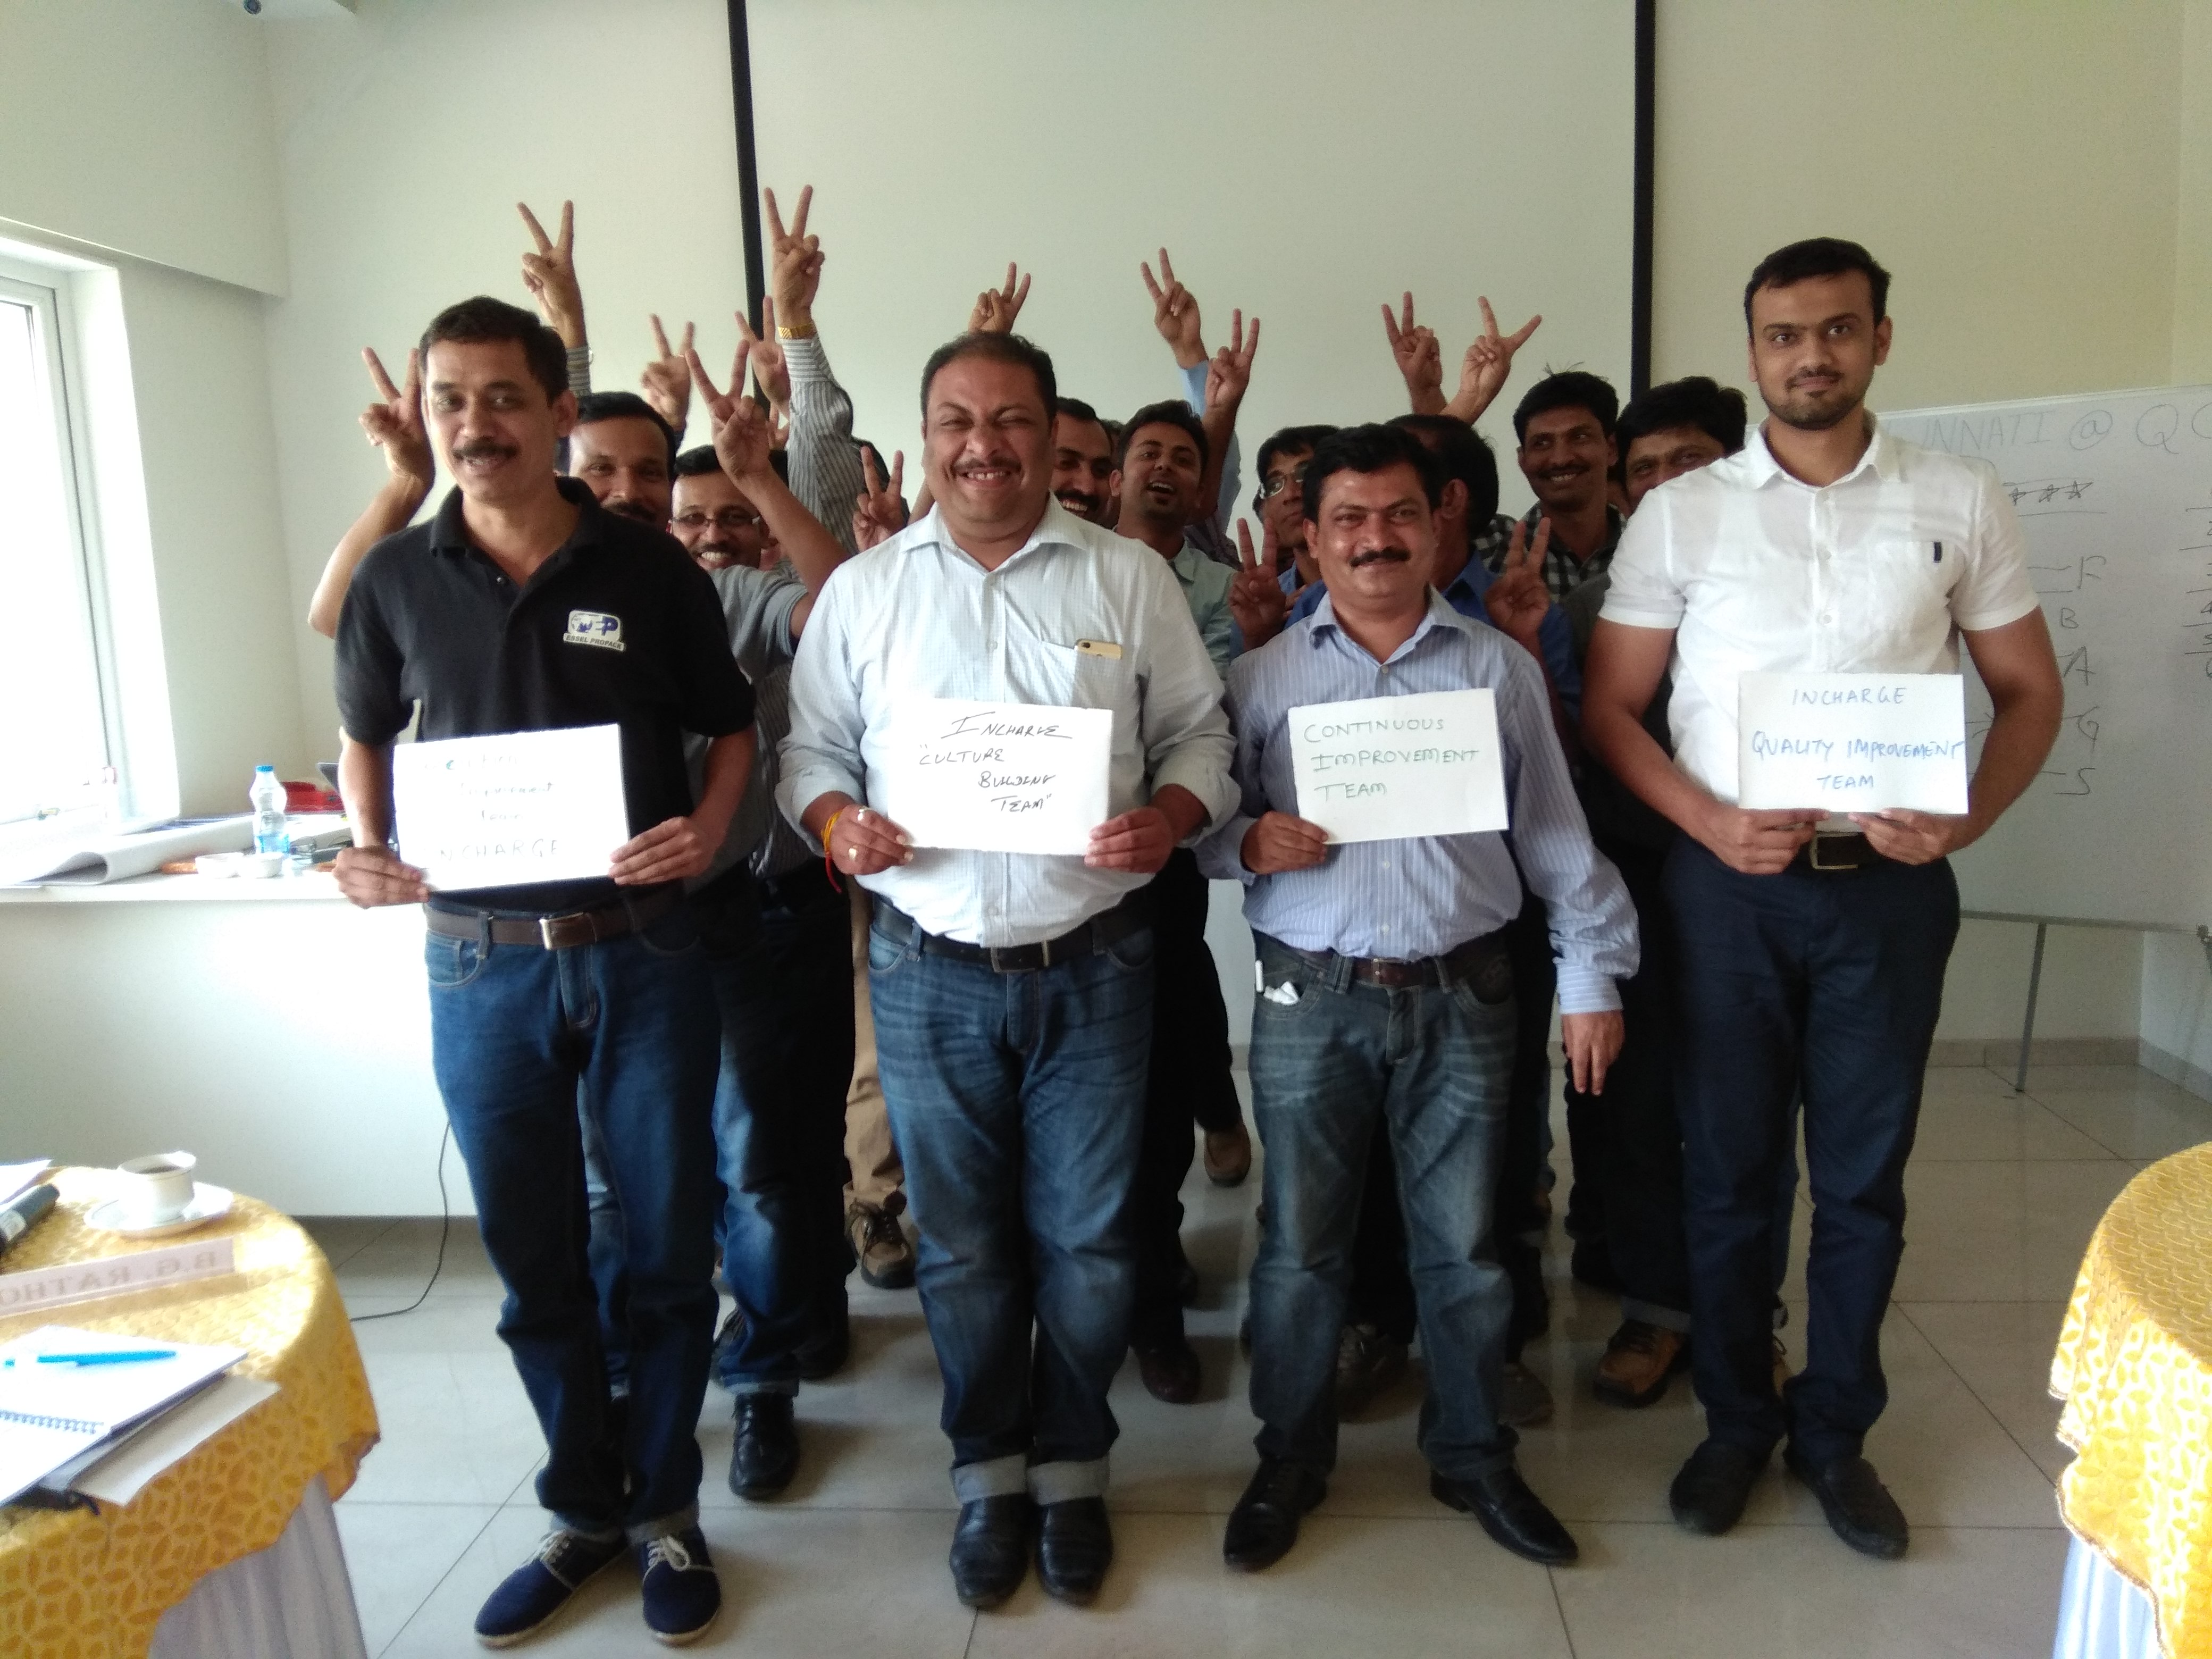 Improvement Teams constituted at the end of workshop